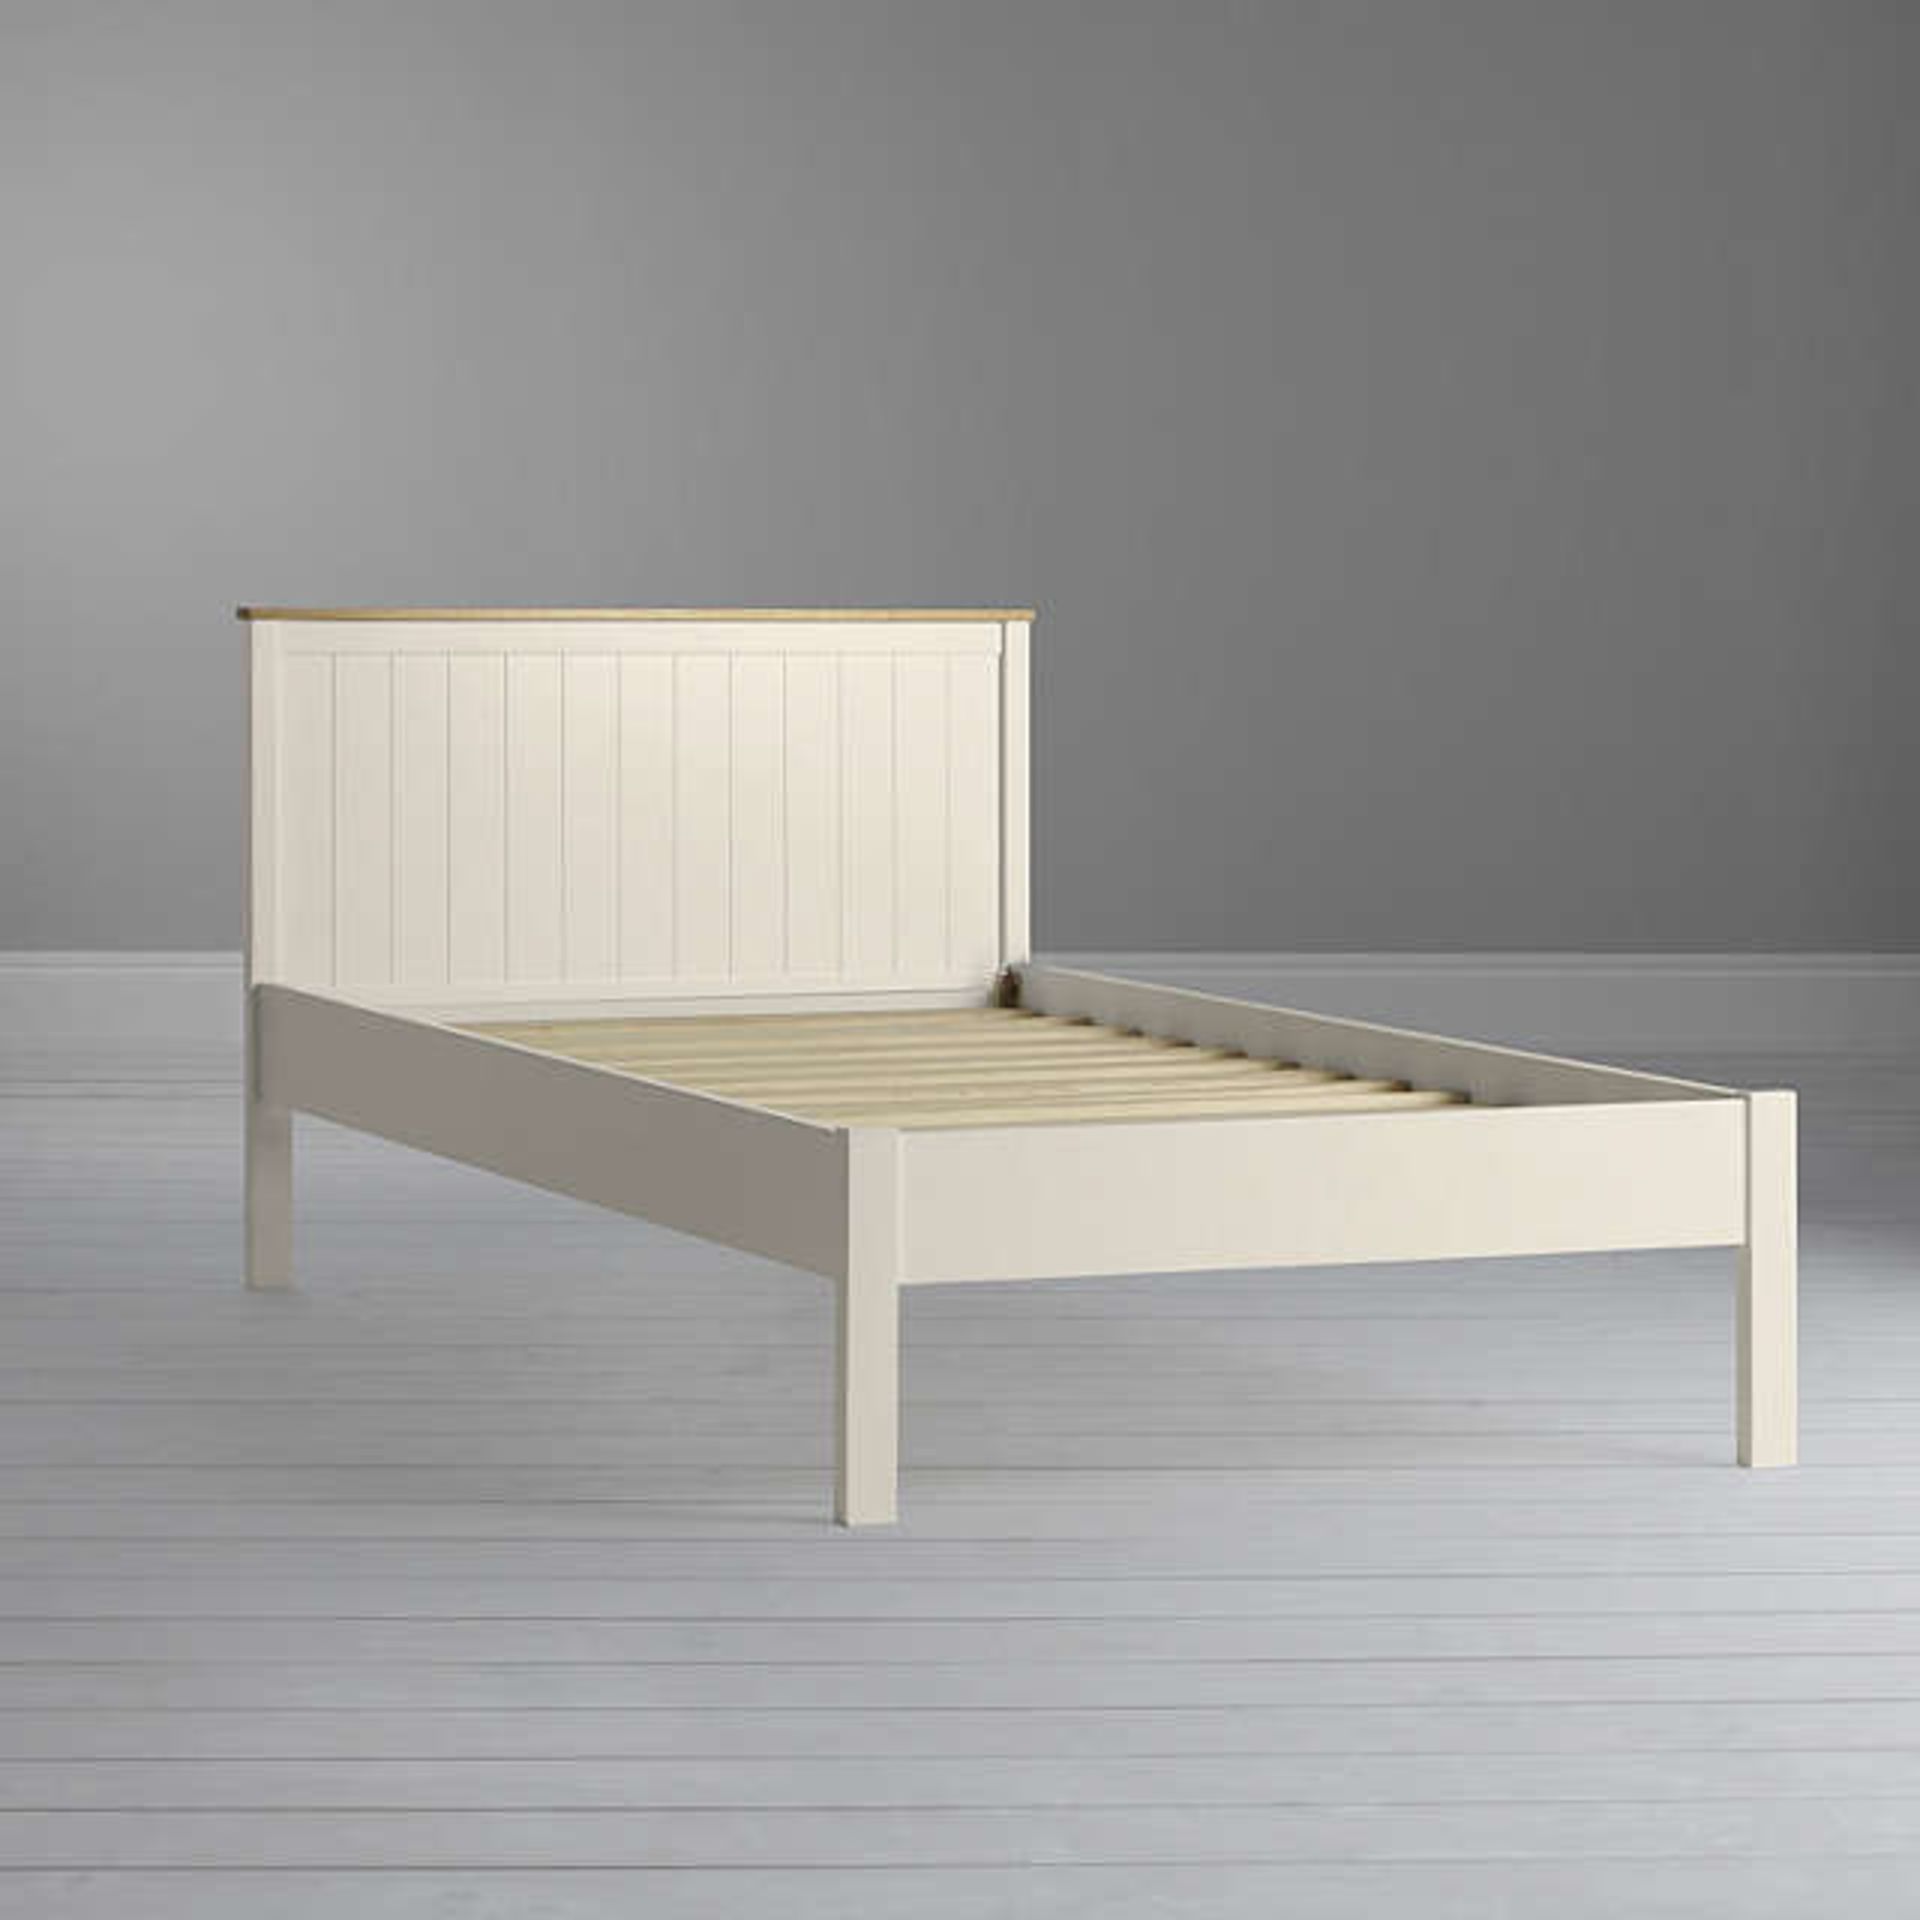 1 x BOXED 150 CM KING SIZE DARTON GROOVE BED IN SOFT WHITE AND OAK (12/10/17) (2429357) *PLEASE NOTE